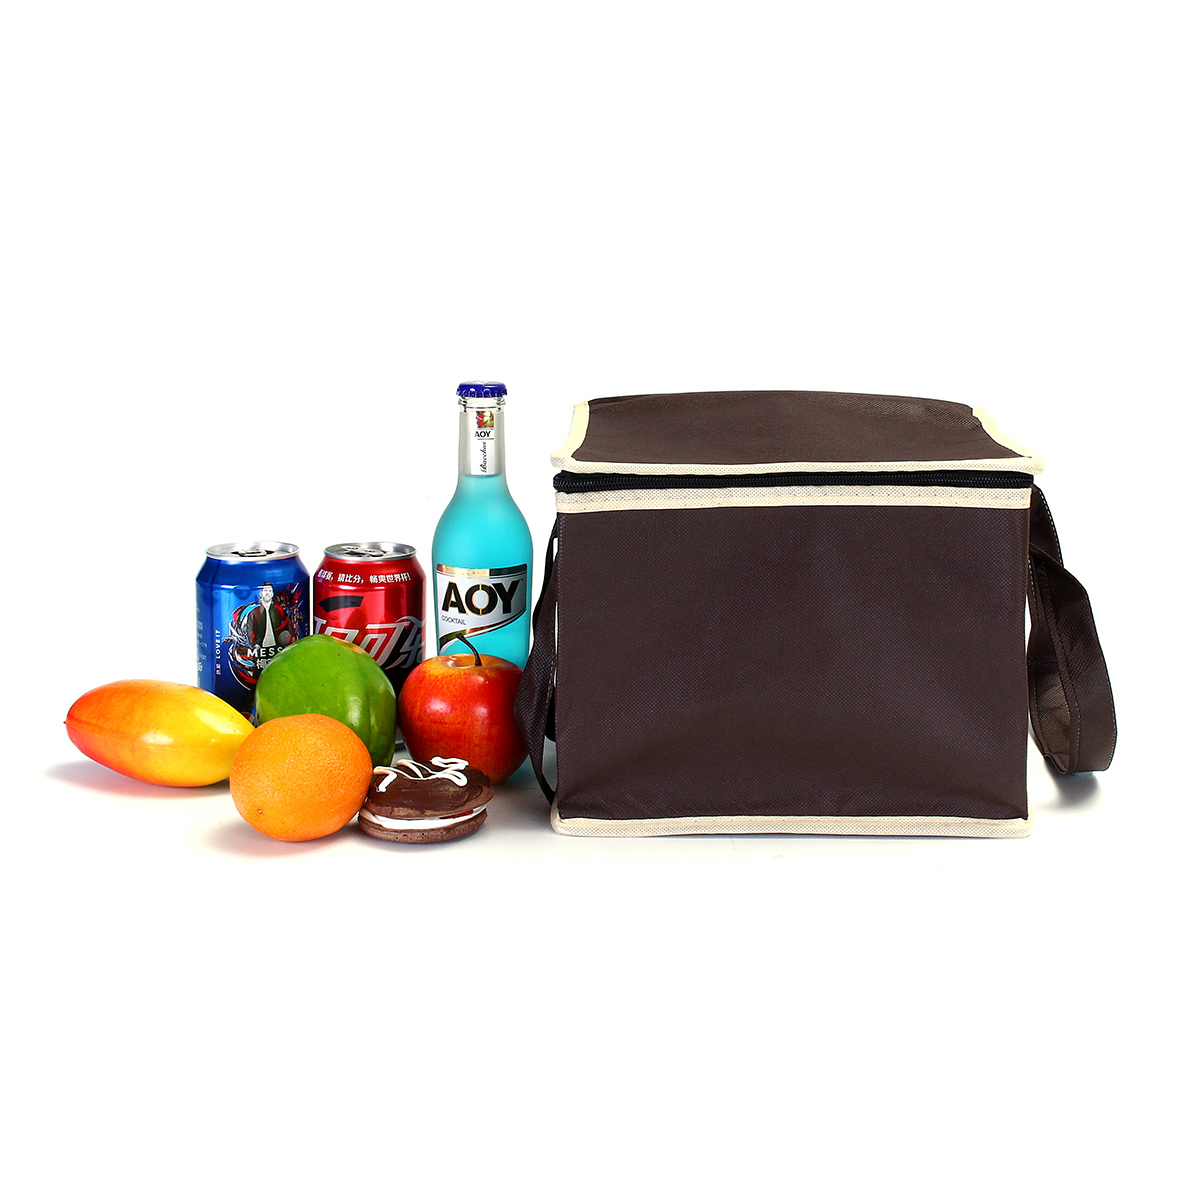 8-Inch-Non-woven-Fresh-keeping-Tote-Bag-with-Zipper-Cake-Picnic-Lunch-Bag-Reusable-Grocery-Bag-1353005-10